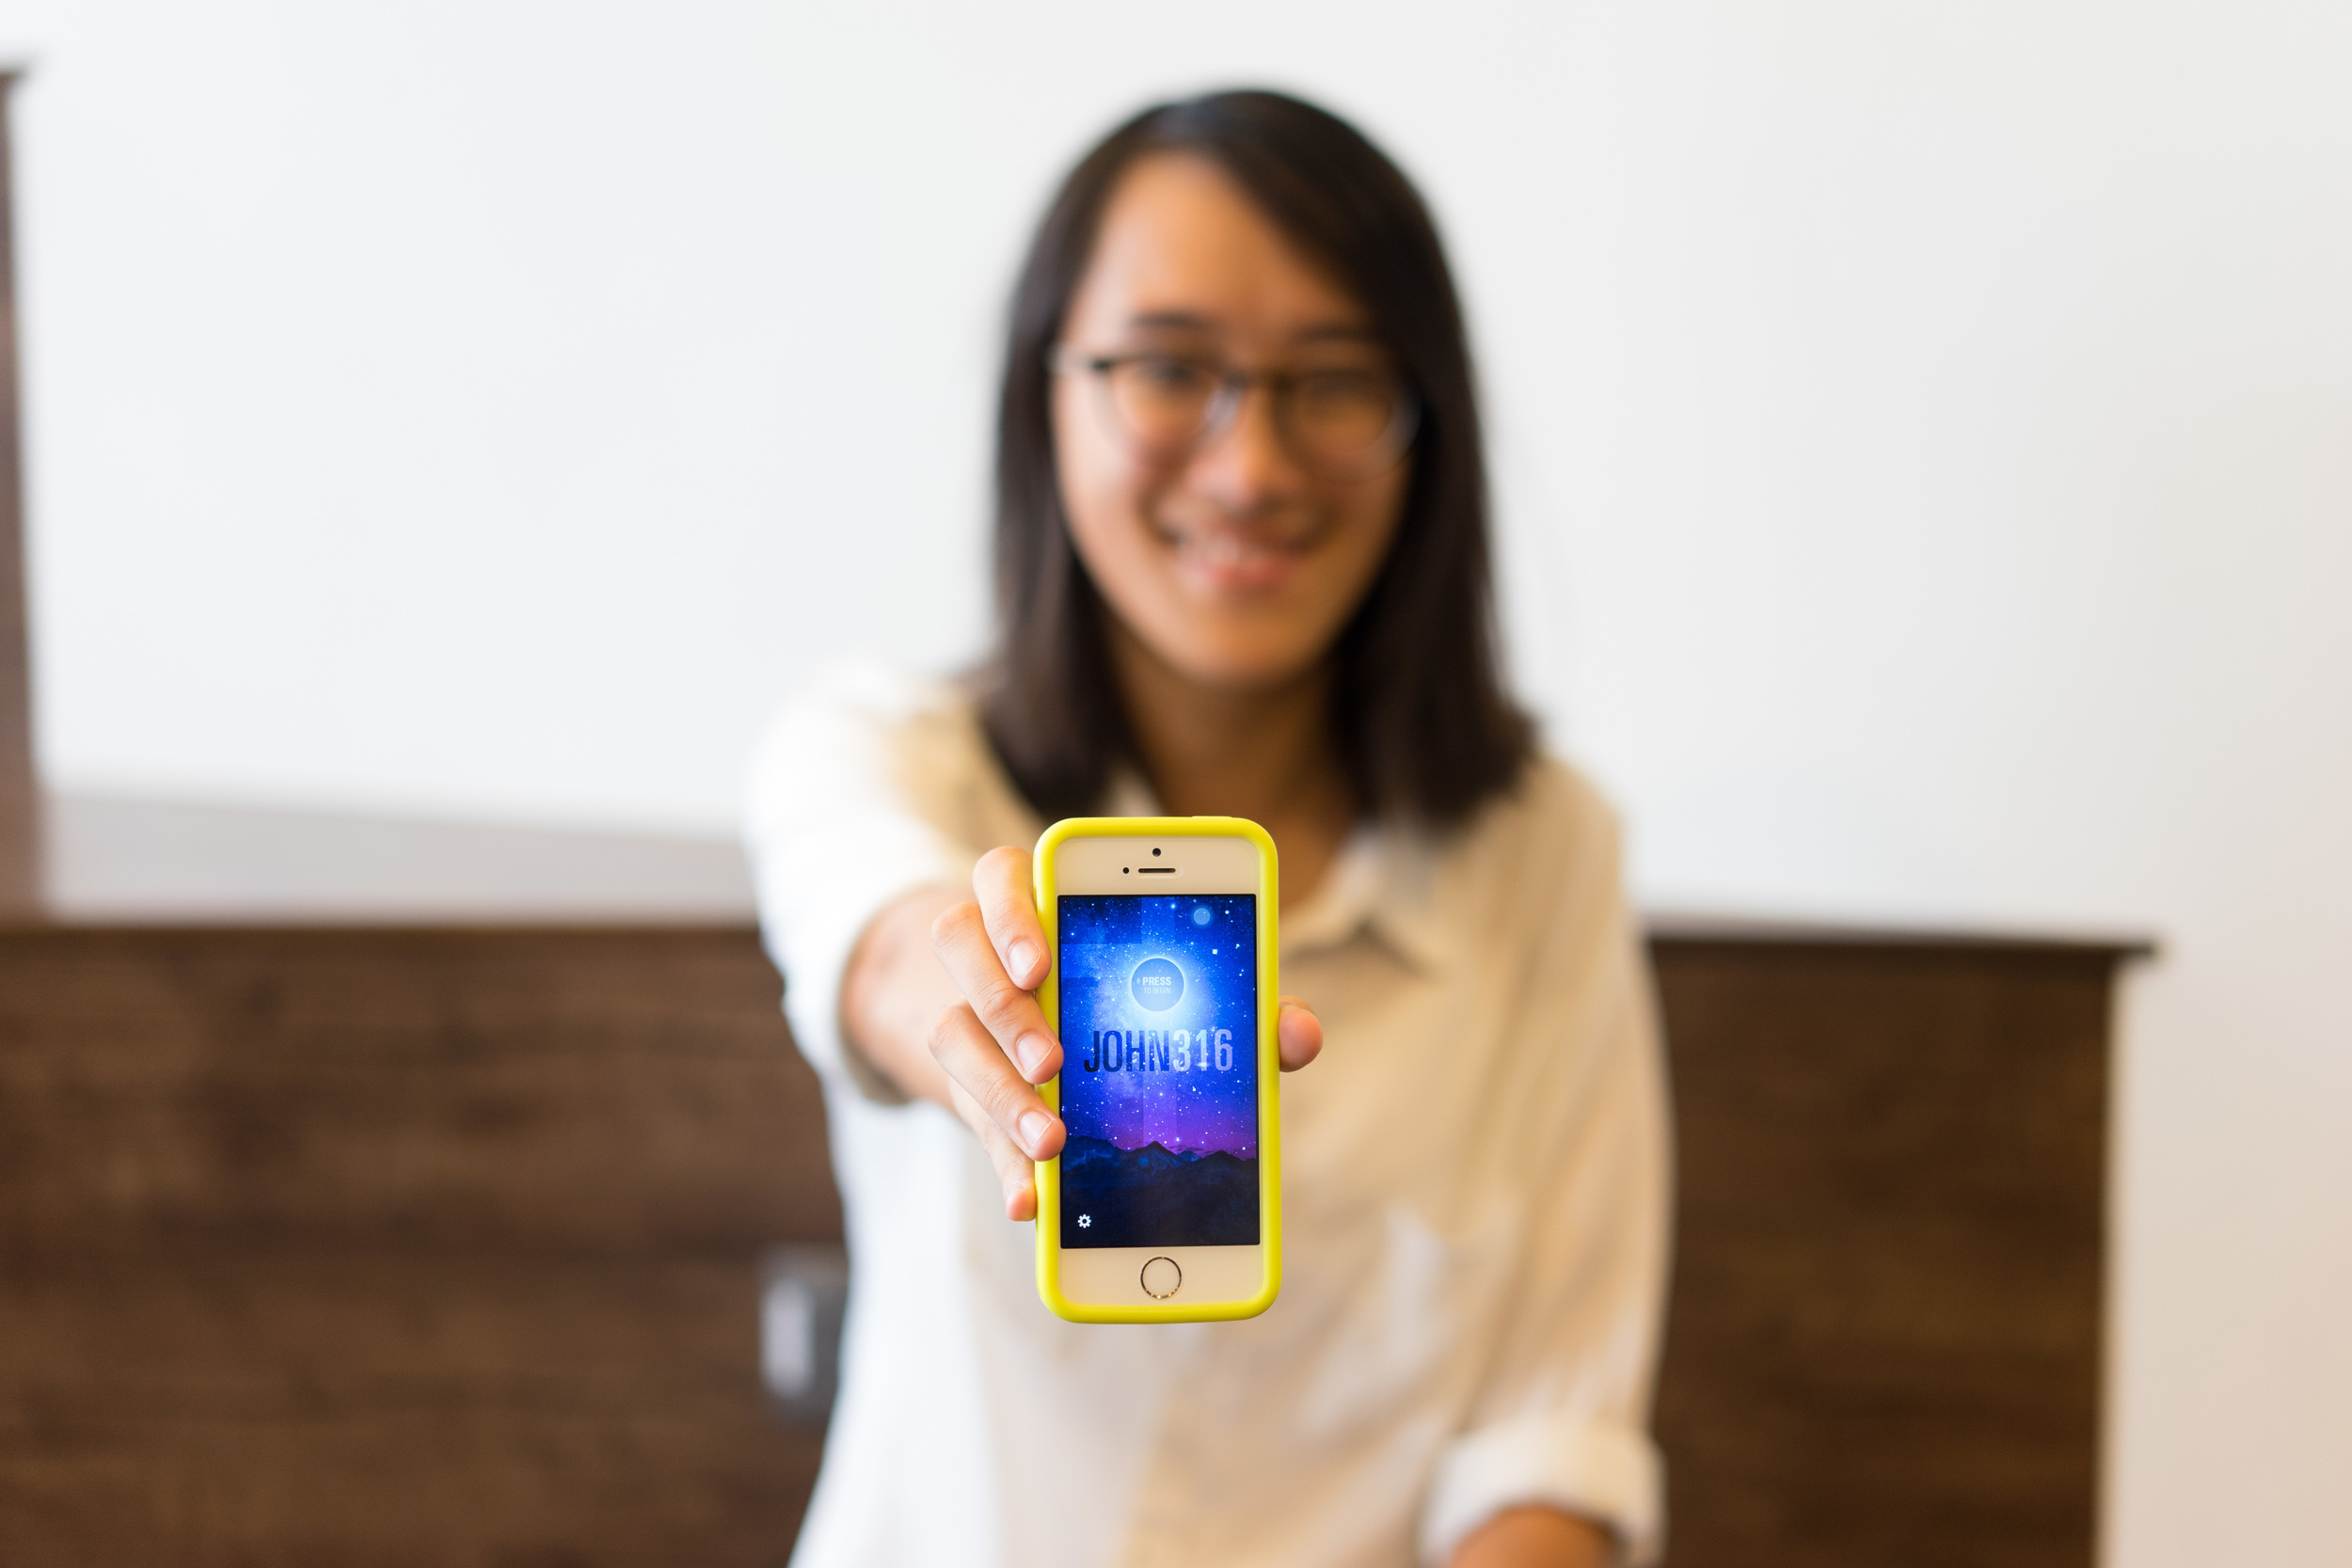 "Through the App, I was able to lead a friend to Christ for the very first time!"